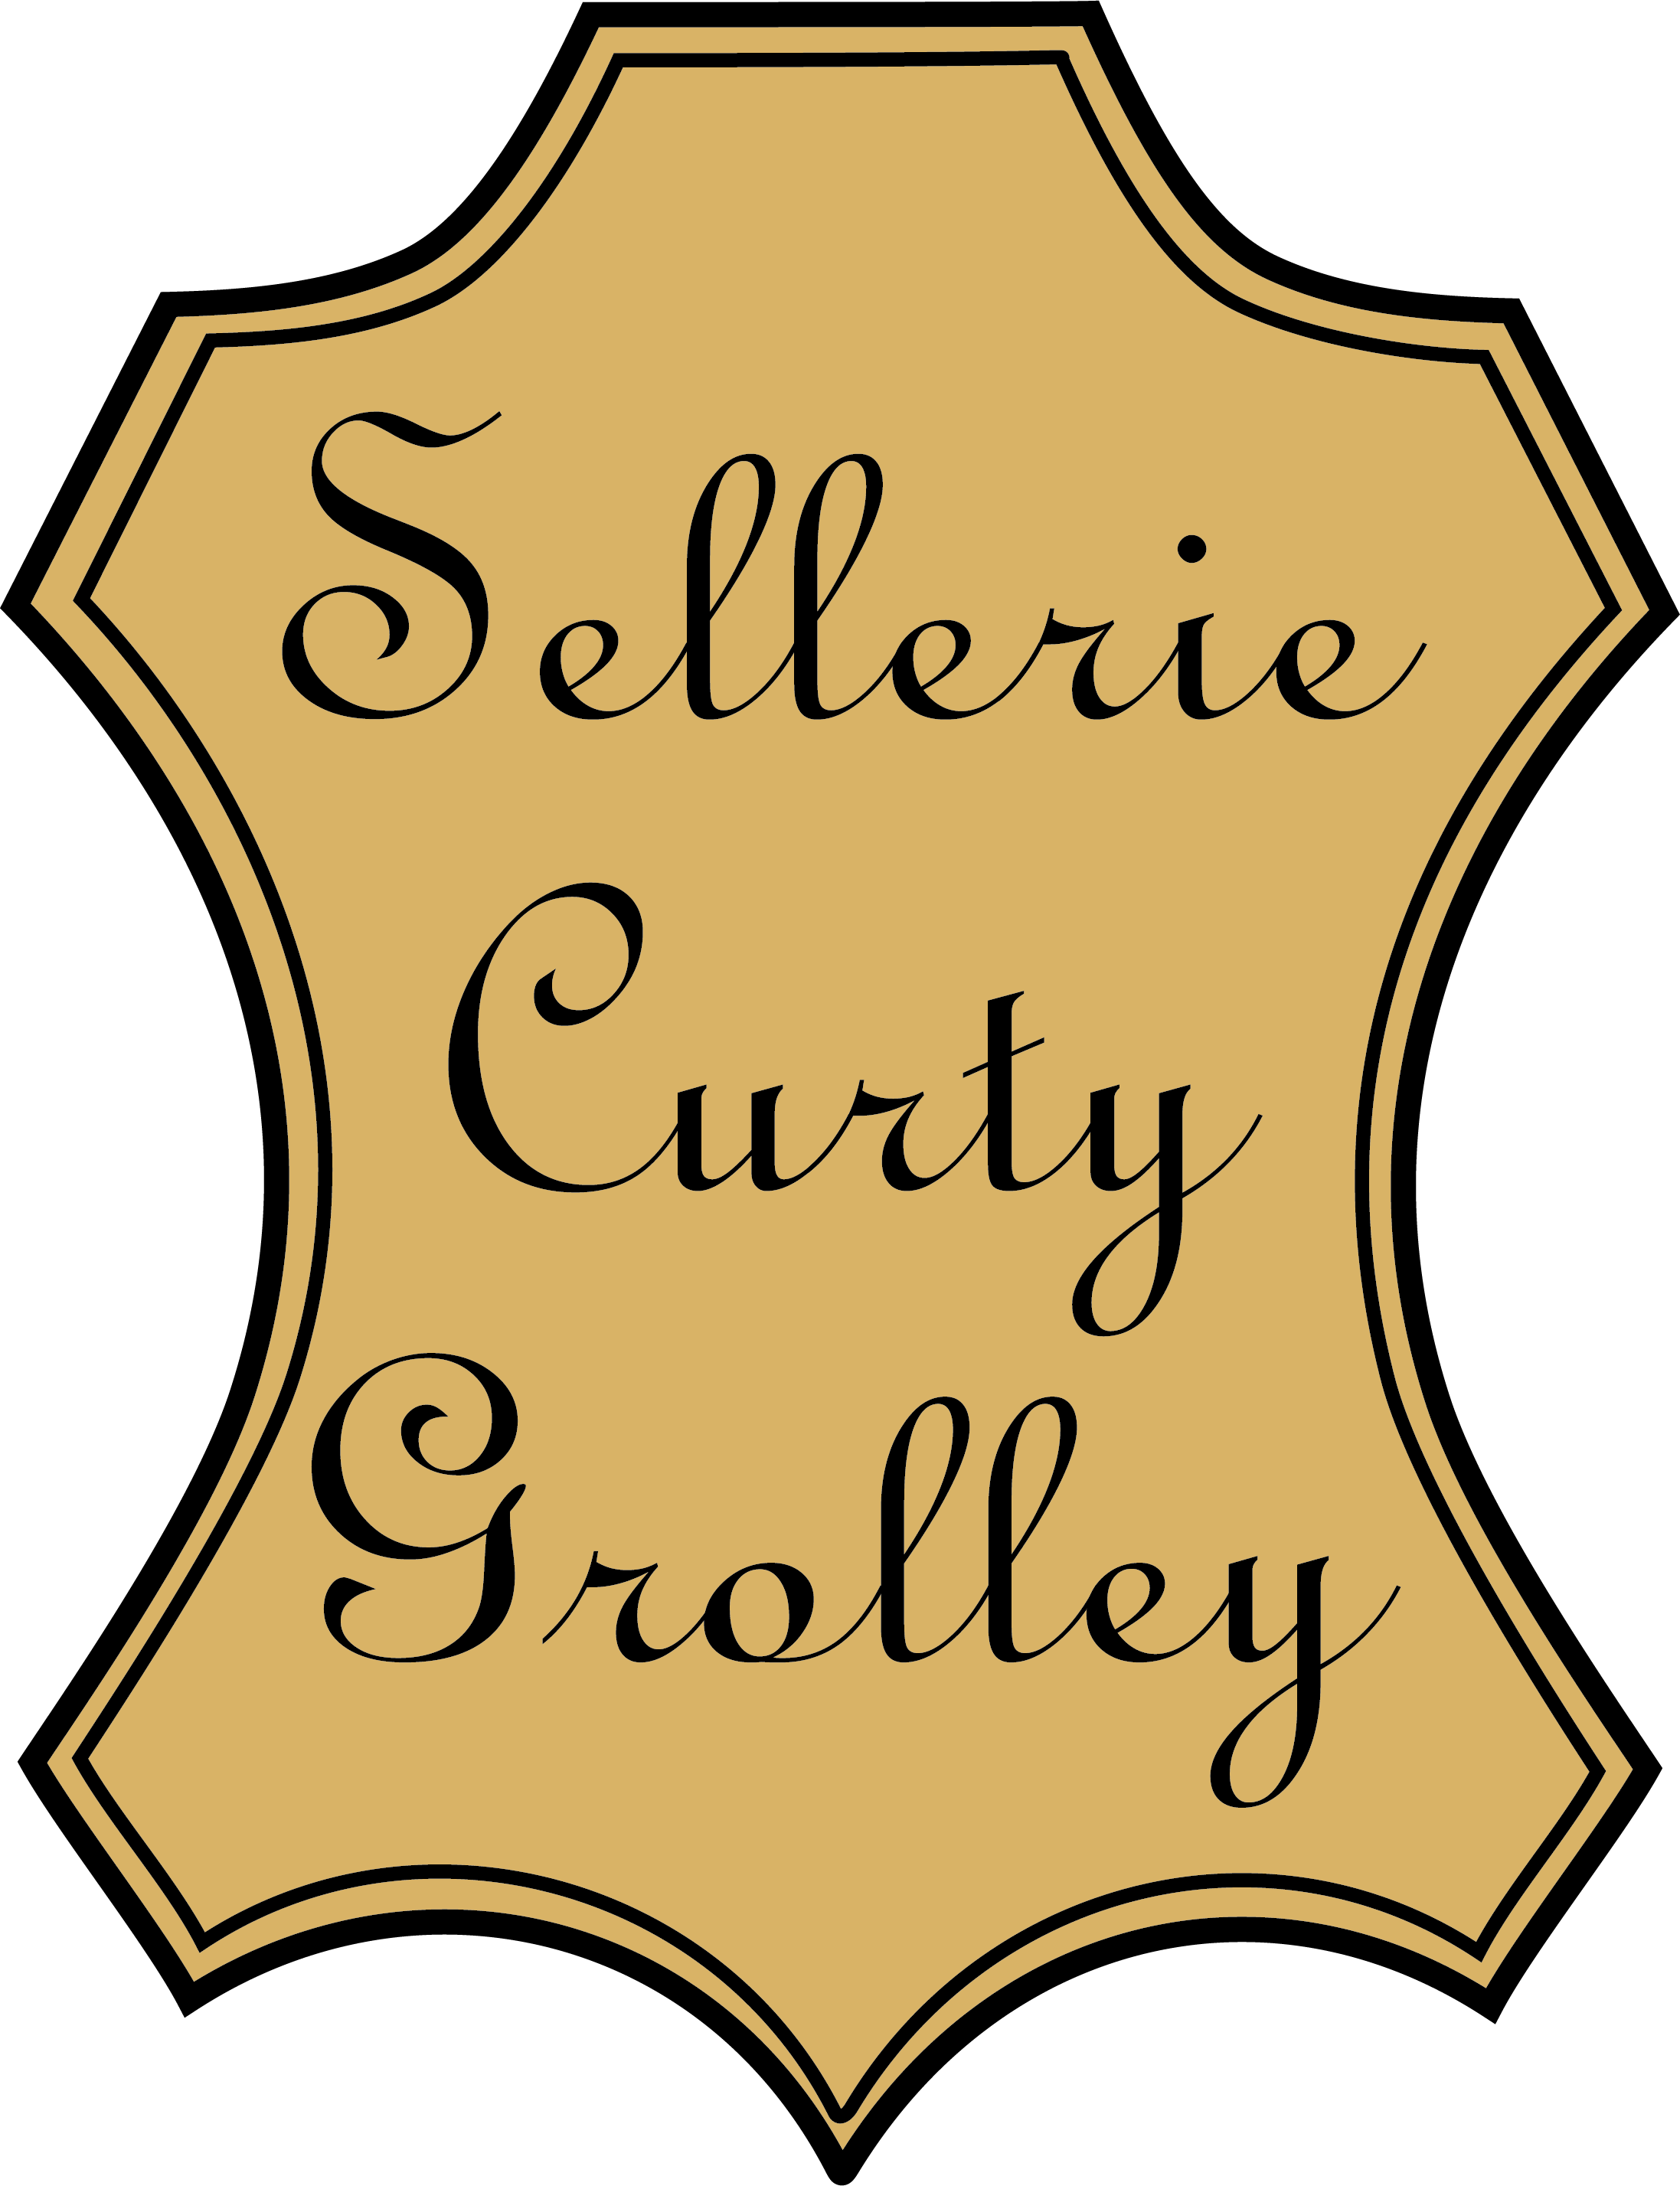 Sellerie Curty